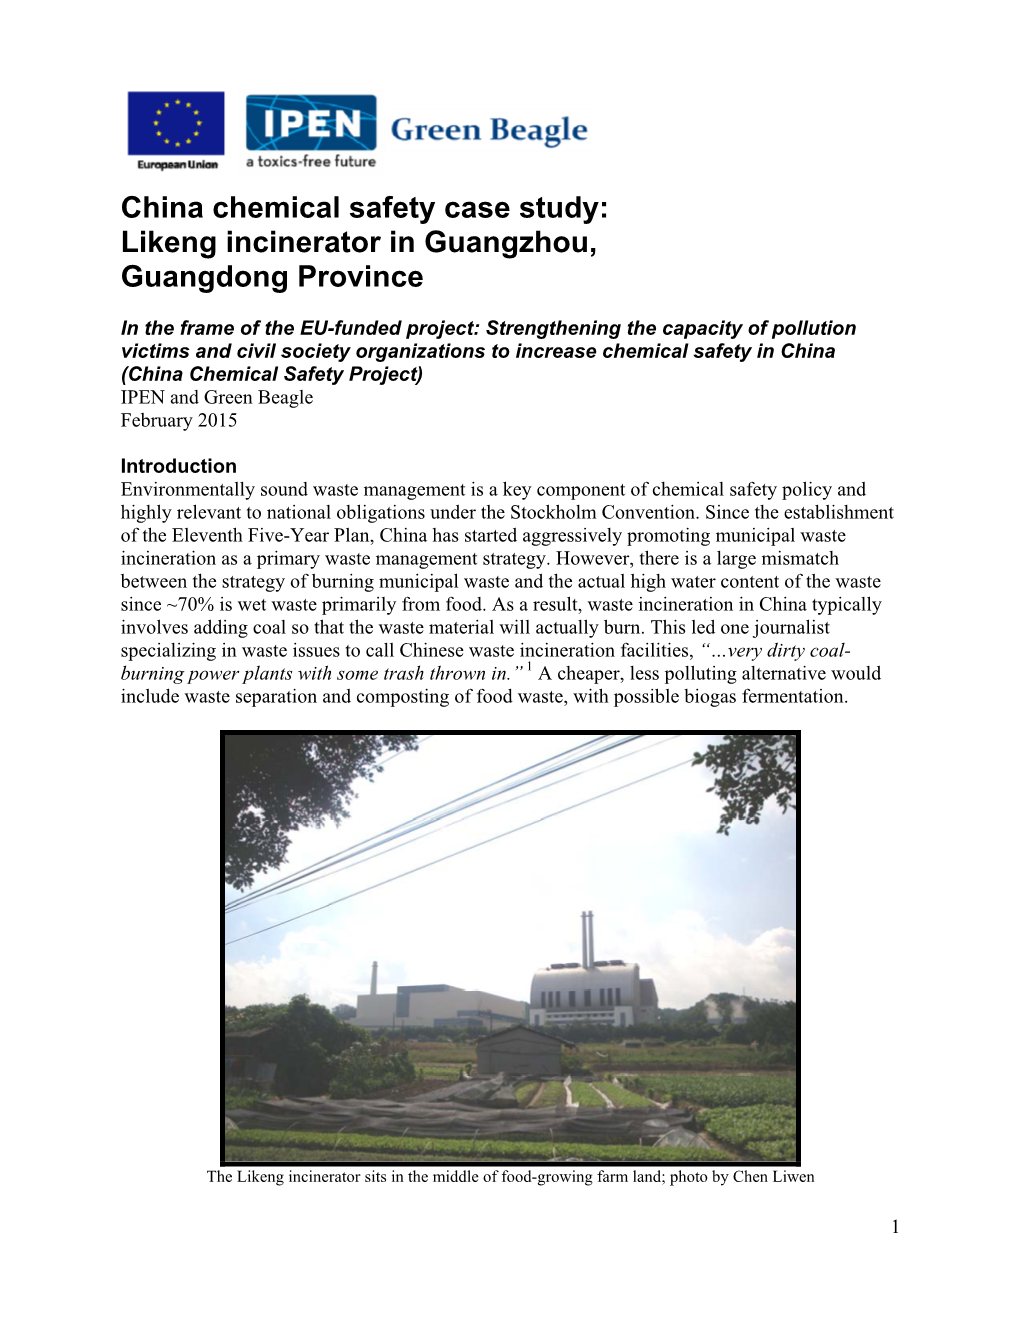 China Chemical Safety Case Study: Likeng Incinerator in Guangzhou, Guangdong Province